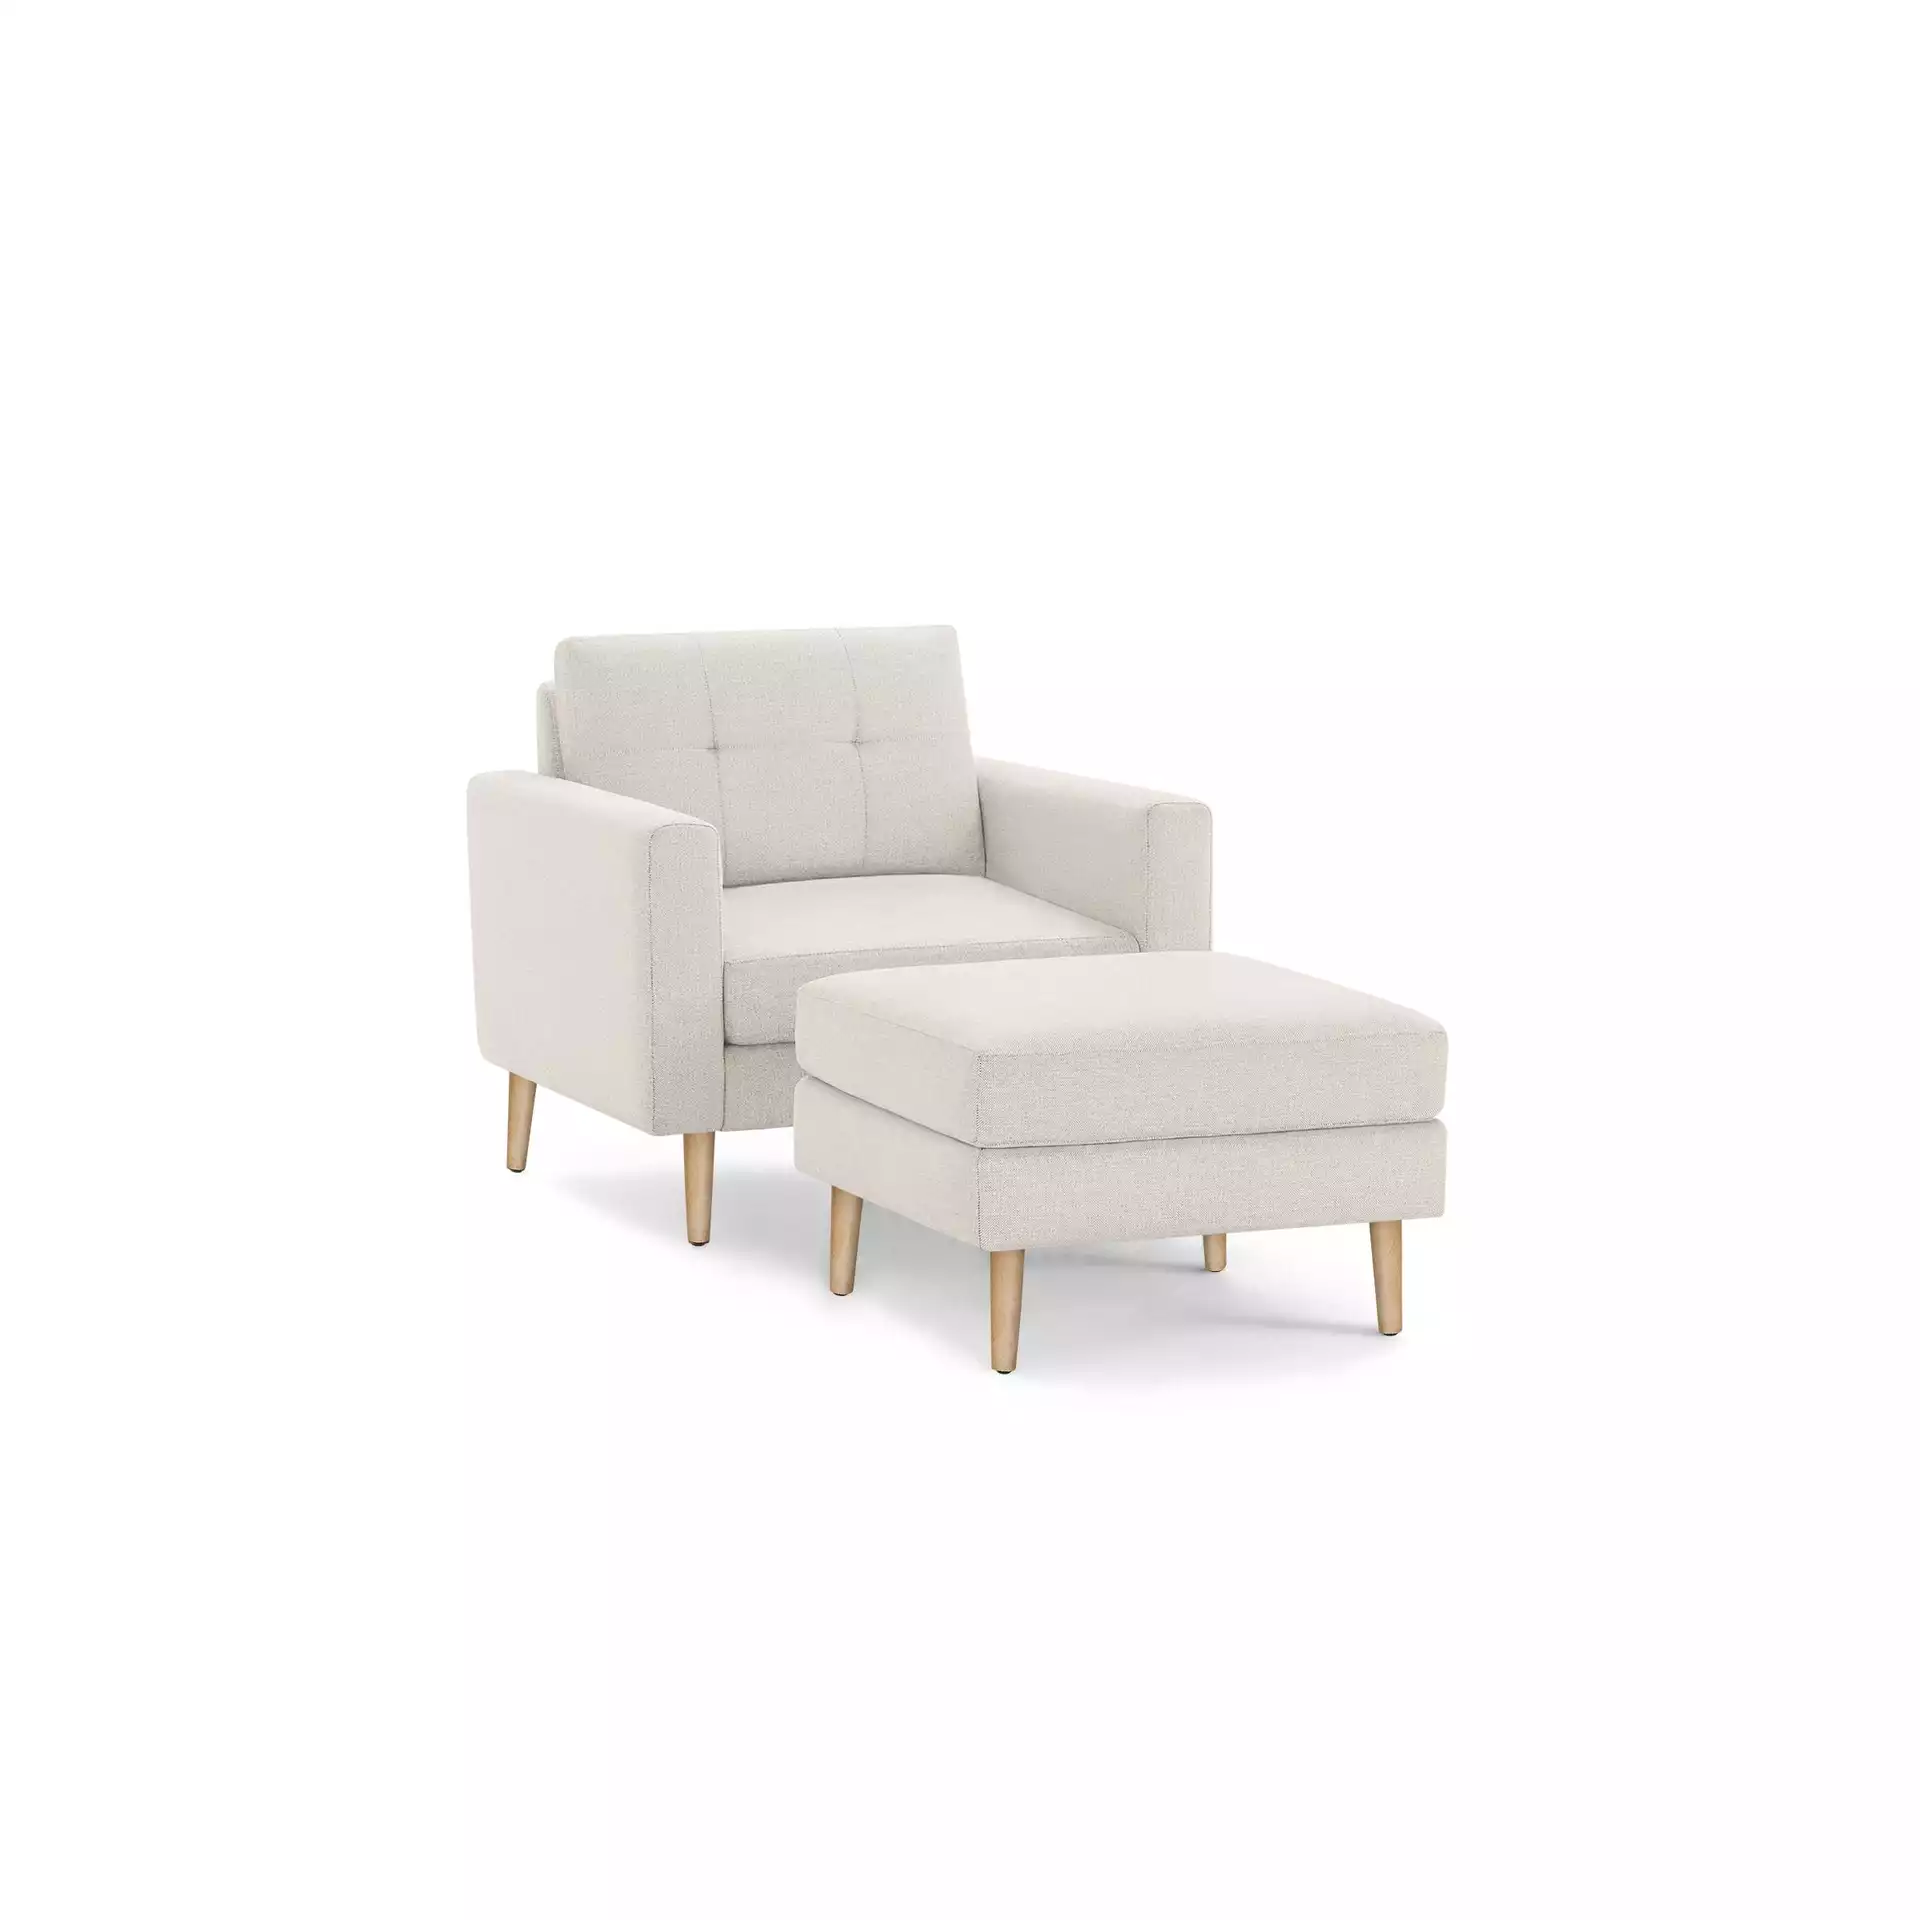 The Block Nomad Armchair with Ottoman in Ivory, Oak Legs